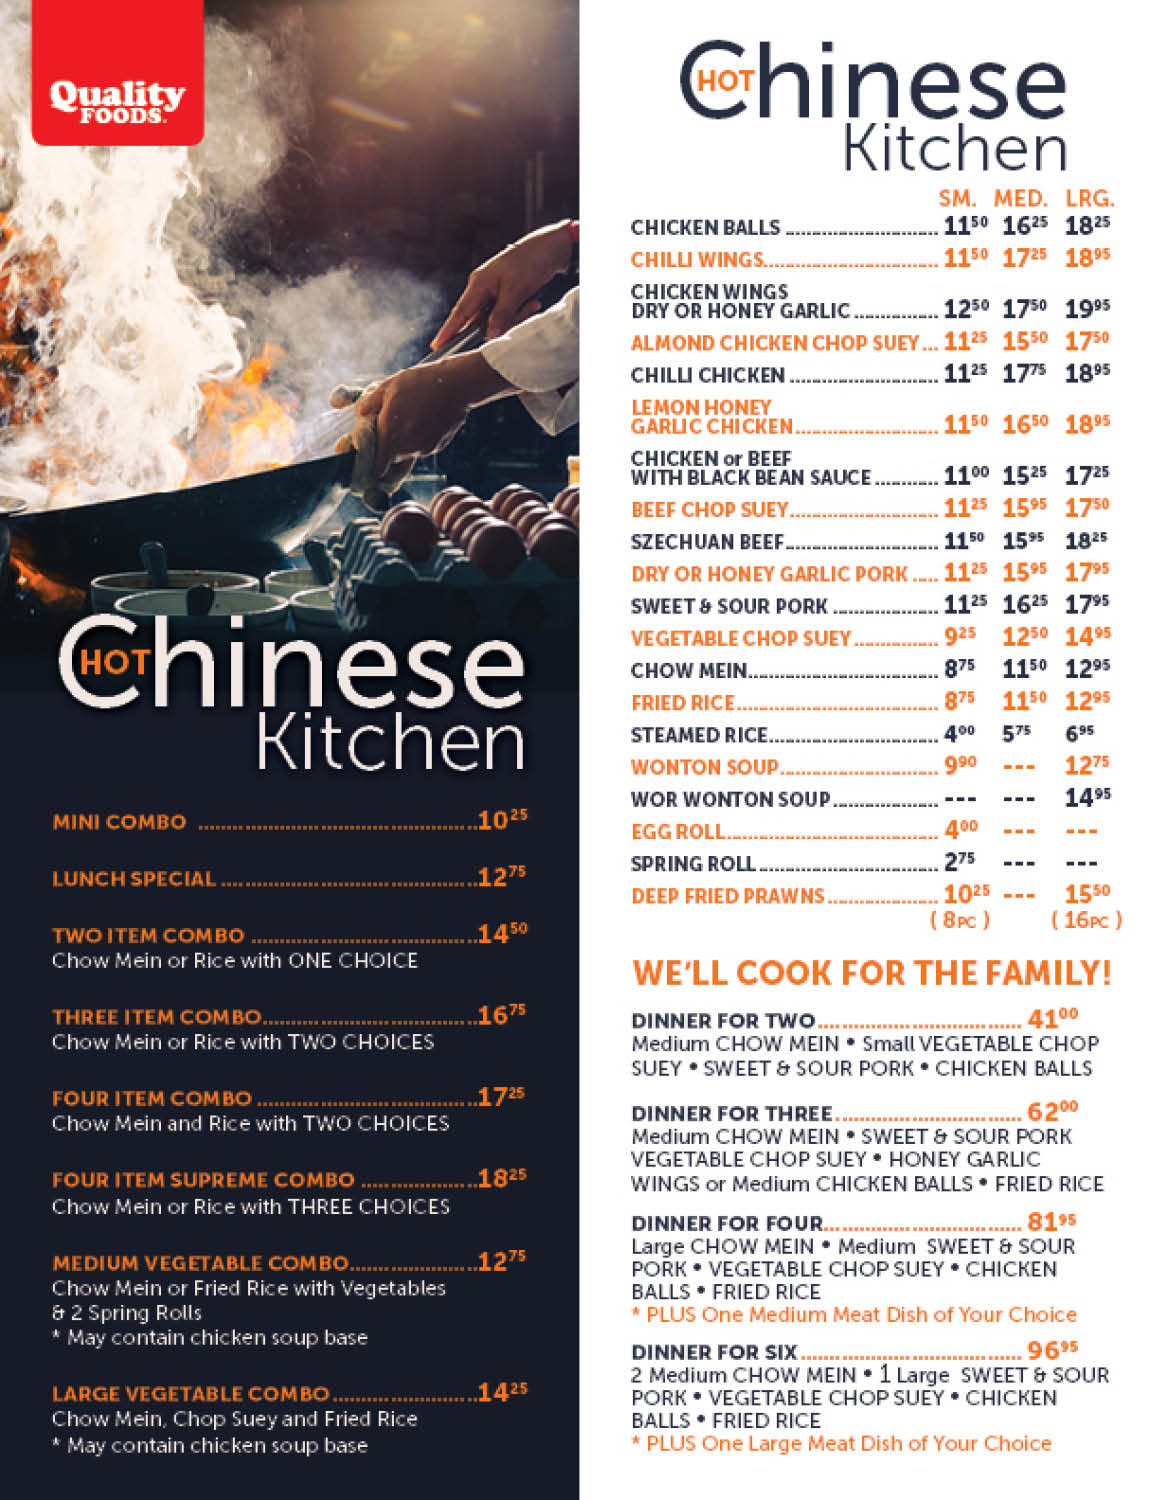 Quality Foods Chinese Kitchen